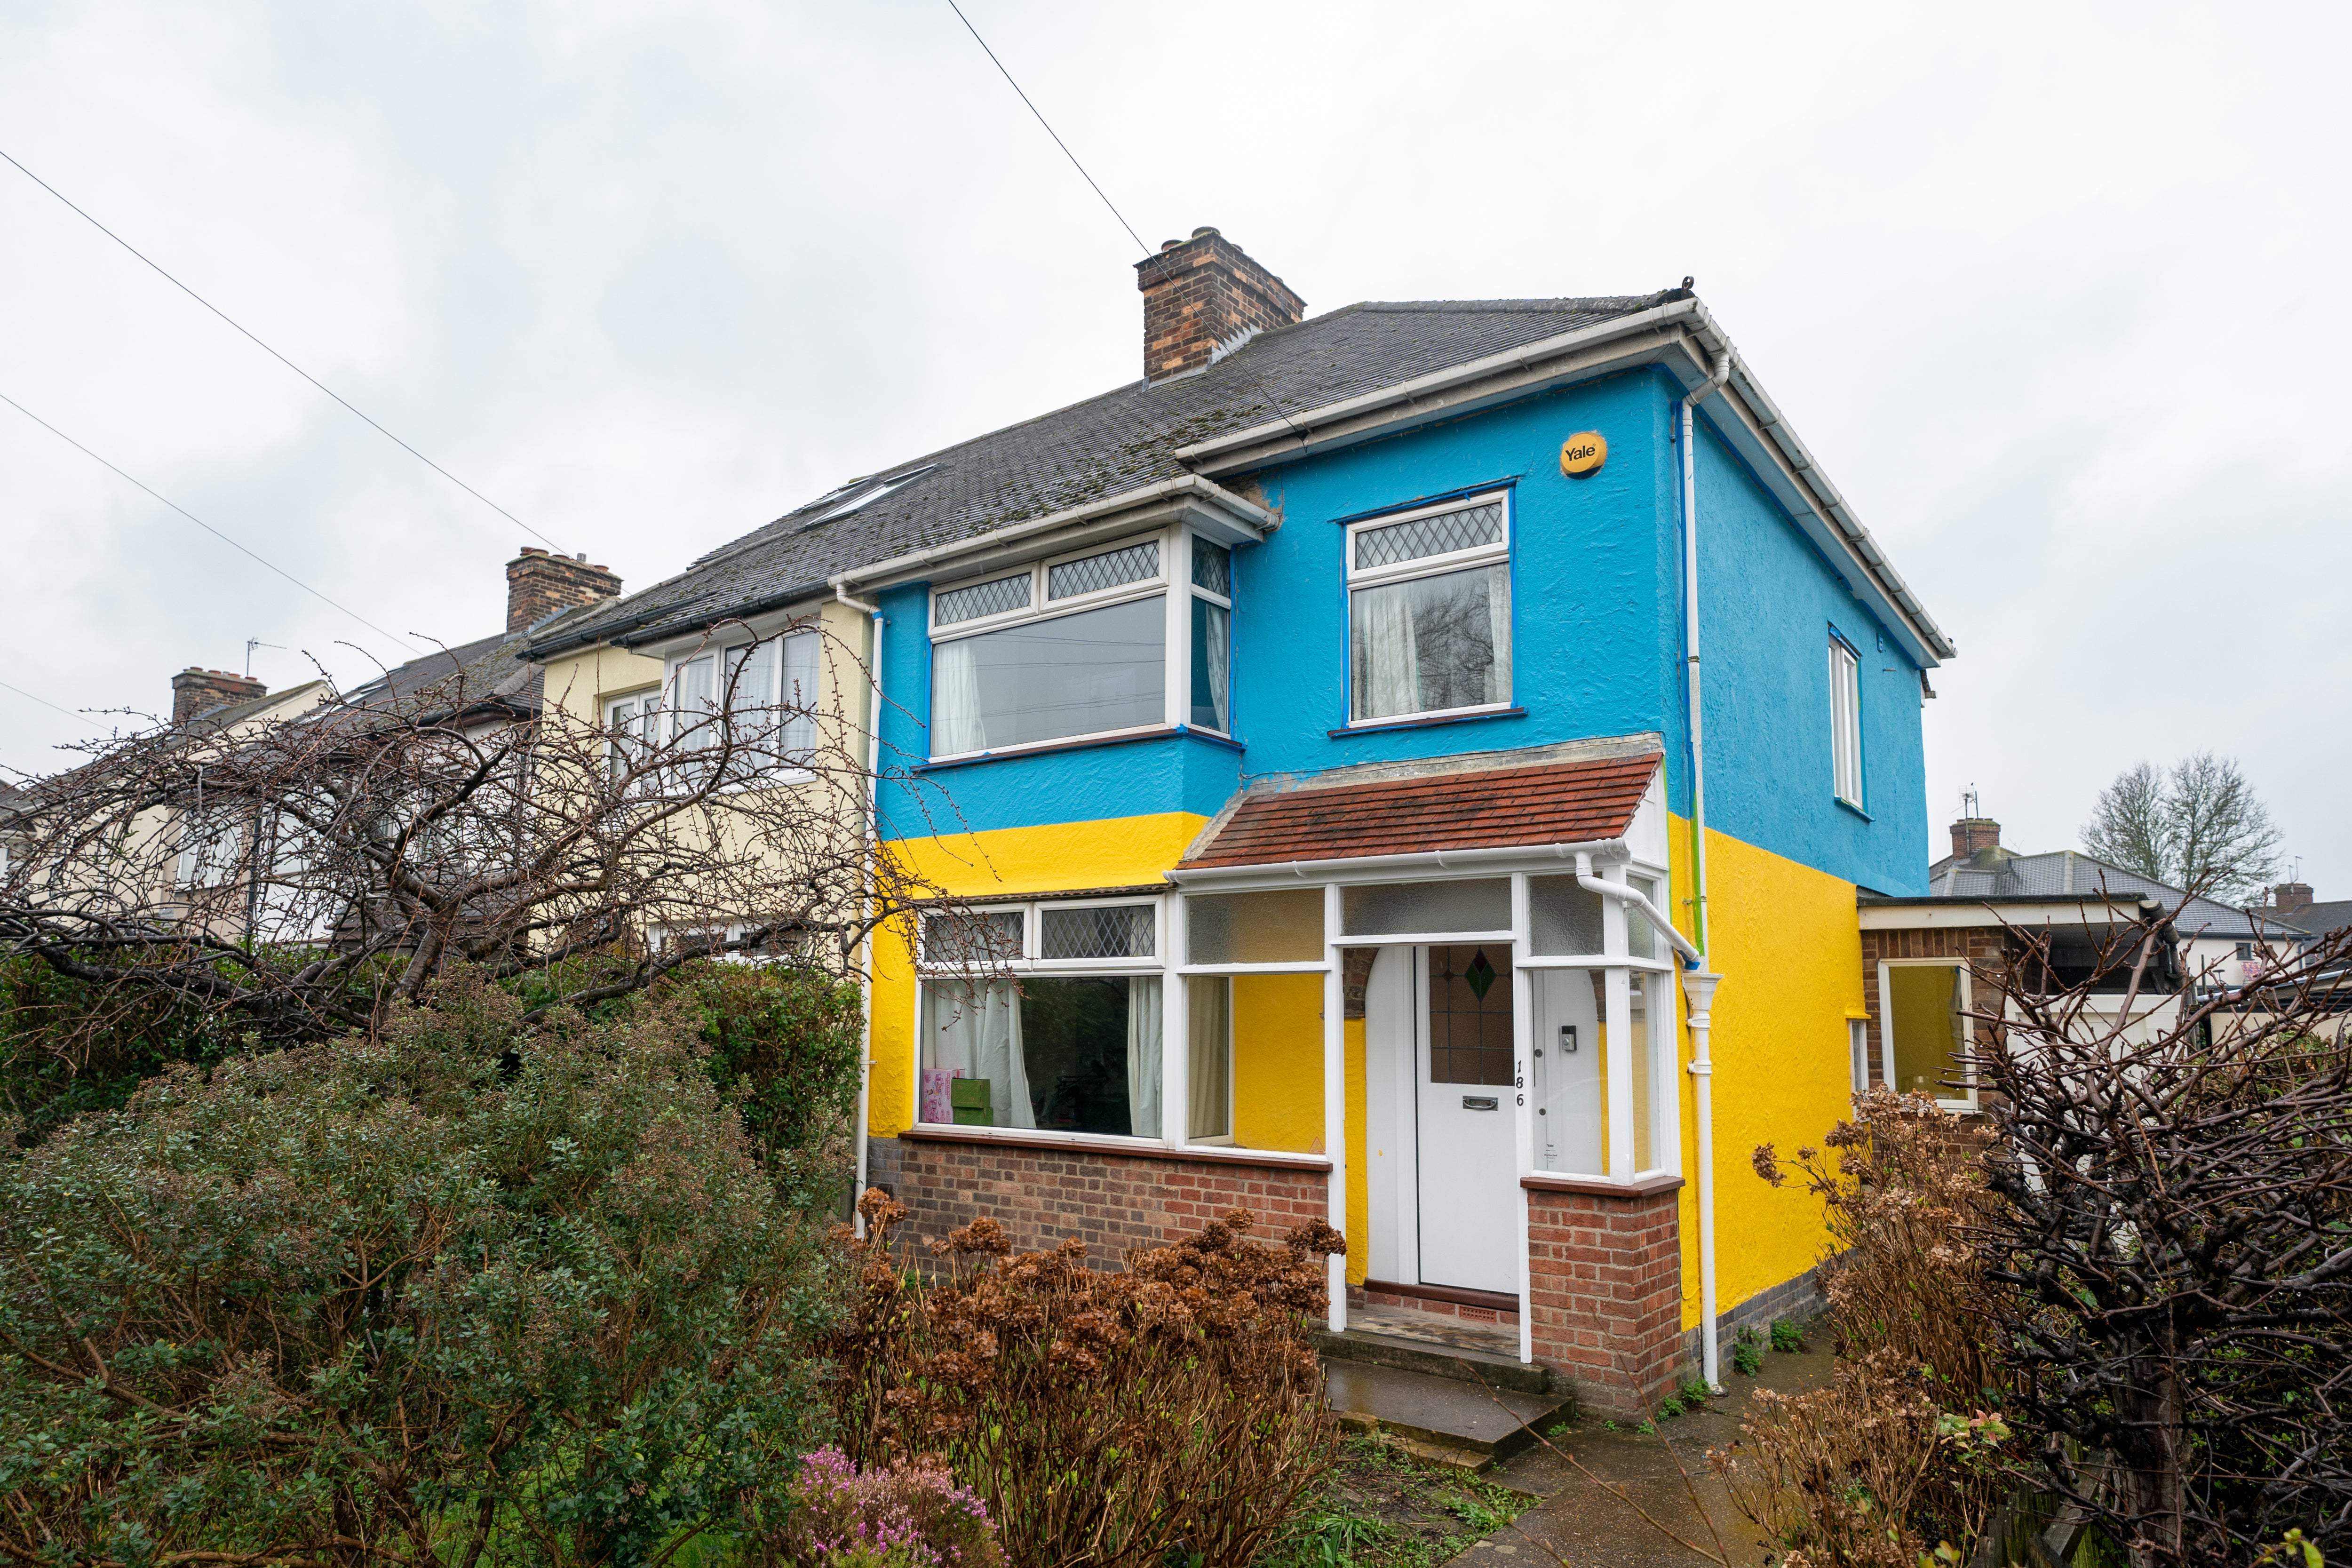 The Platings used two five-litre tubs of paint, one yellow and one blue, costing £76 in total, to decorate the outside of their Cambridge home (Joe Giddens/PA)